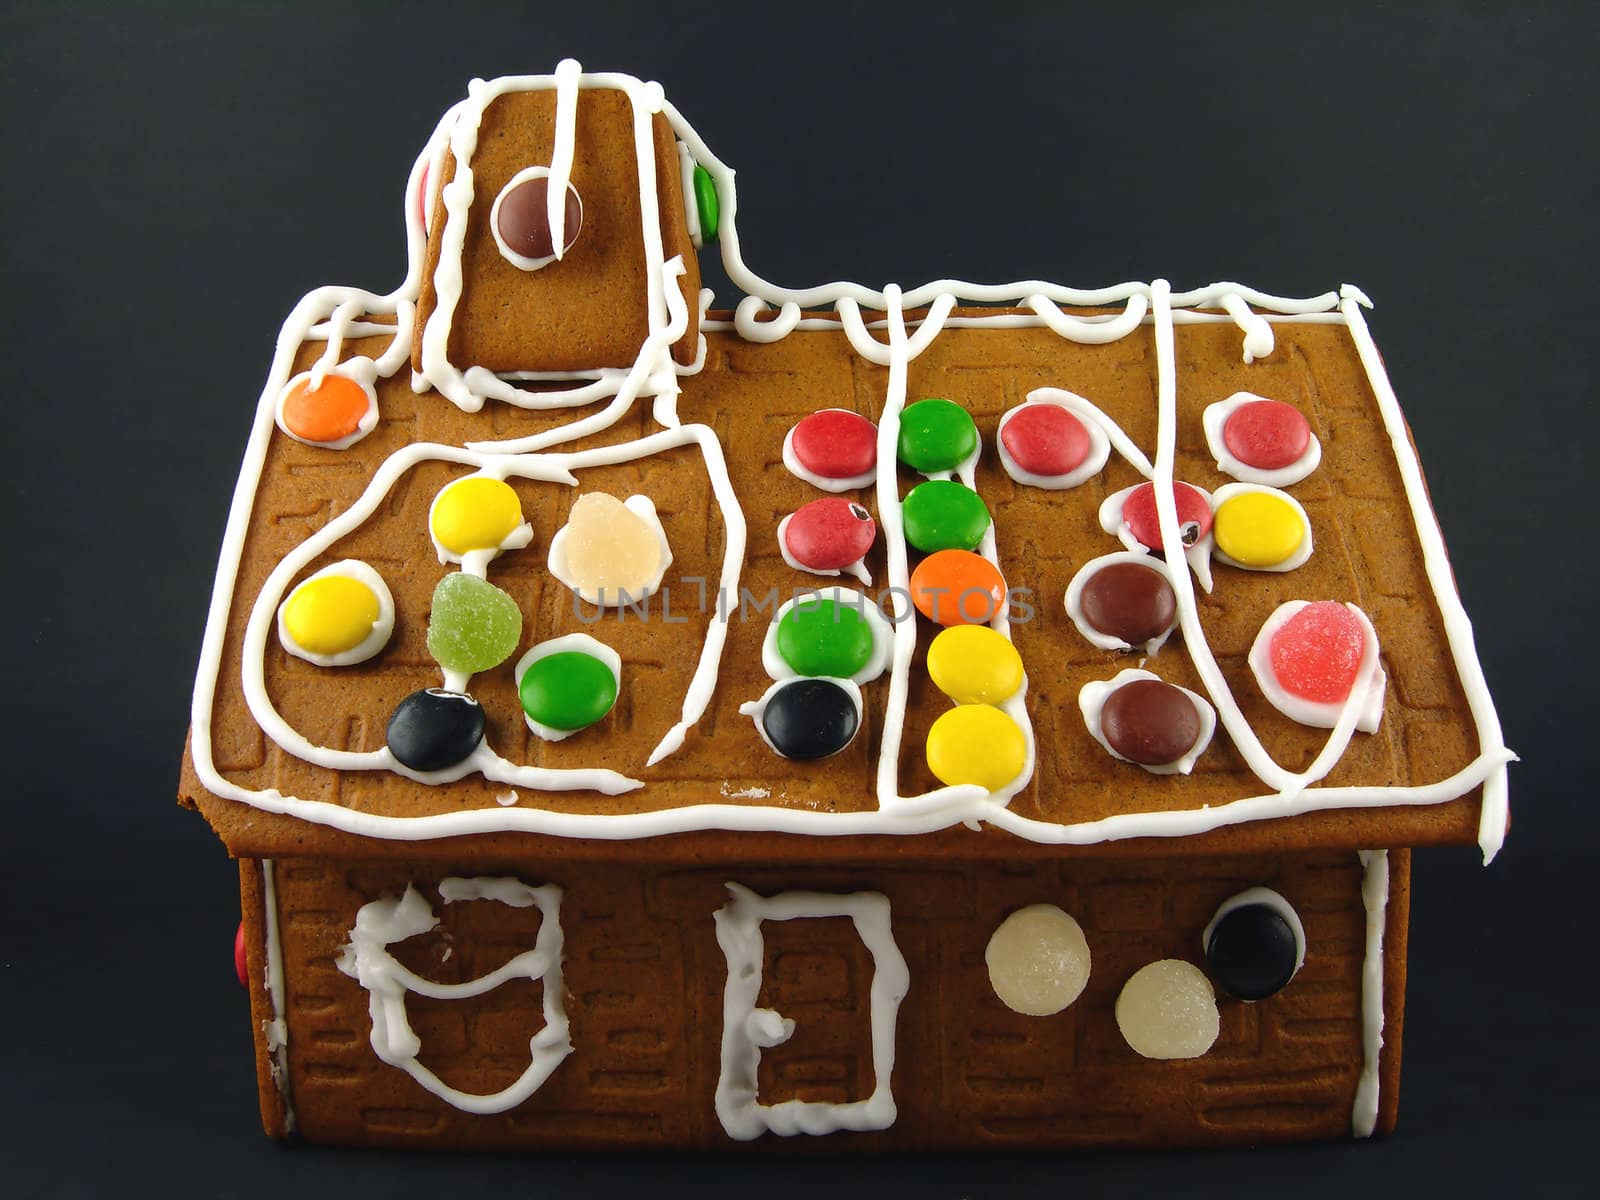 Norwegian Christmas. Decorated Gingerbread house